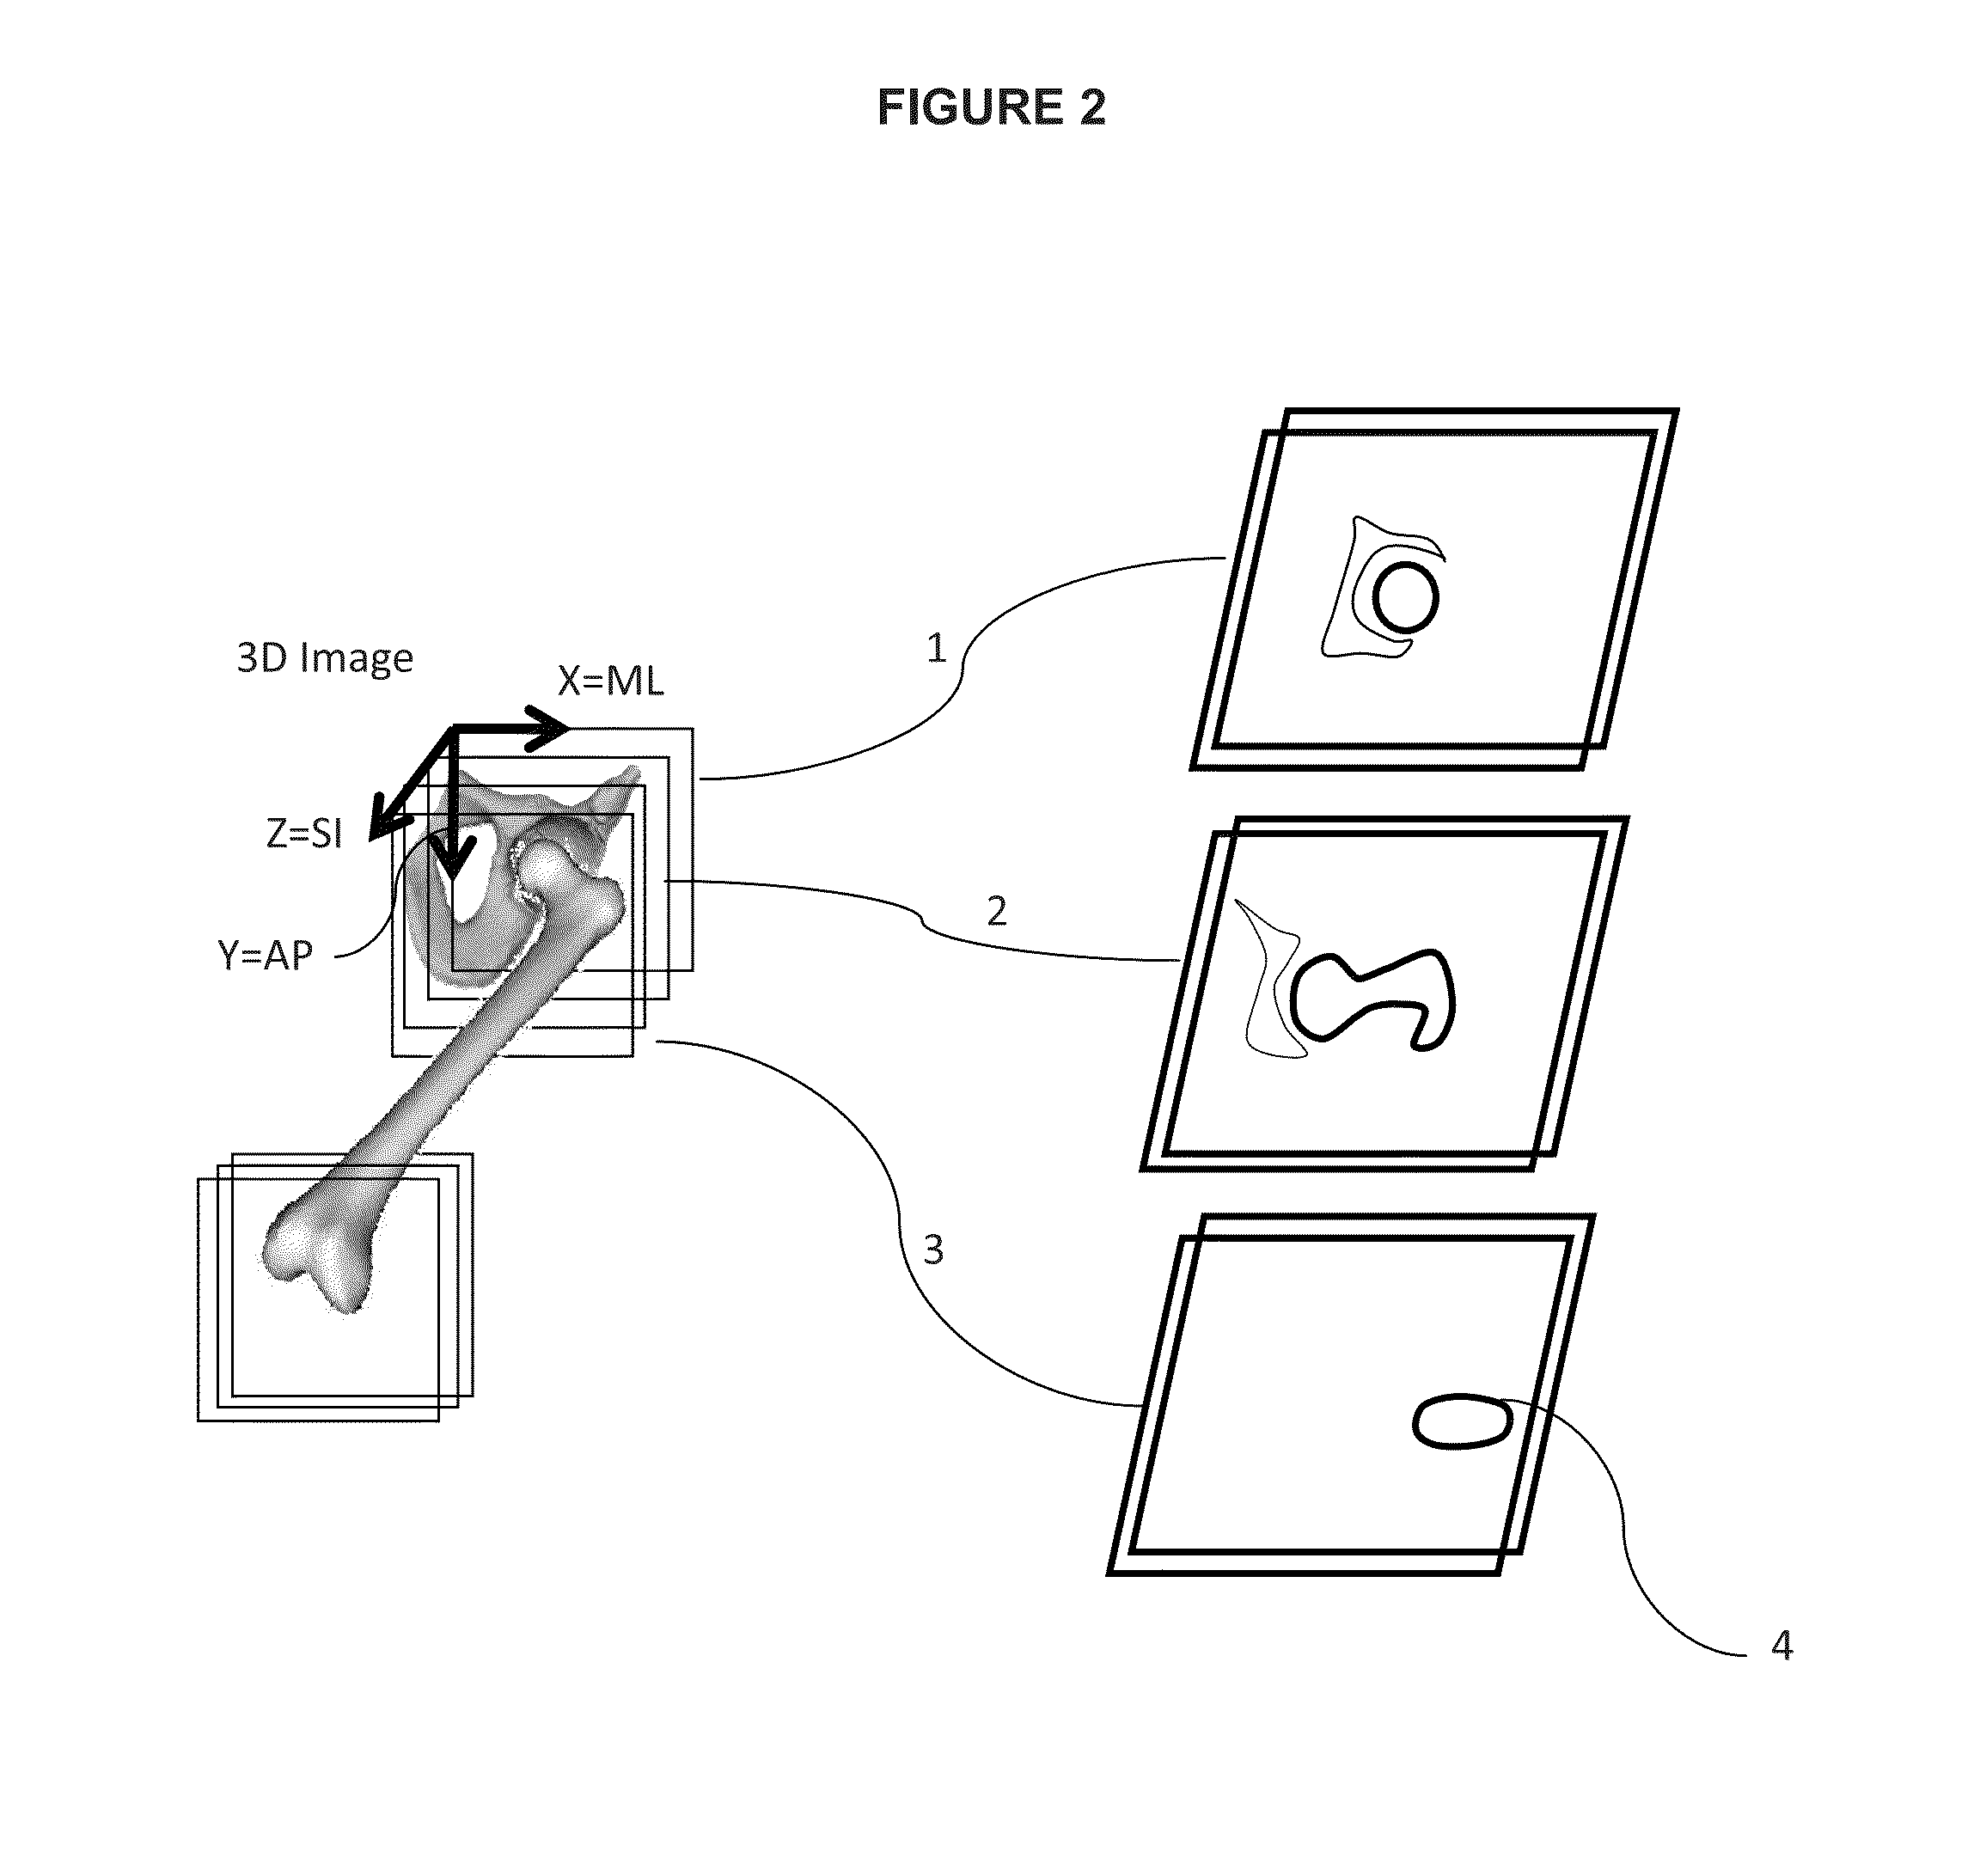 Method and system of automatic determination of geometric elements from a 3D medical image of a bone